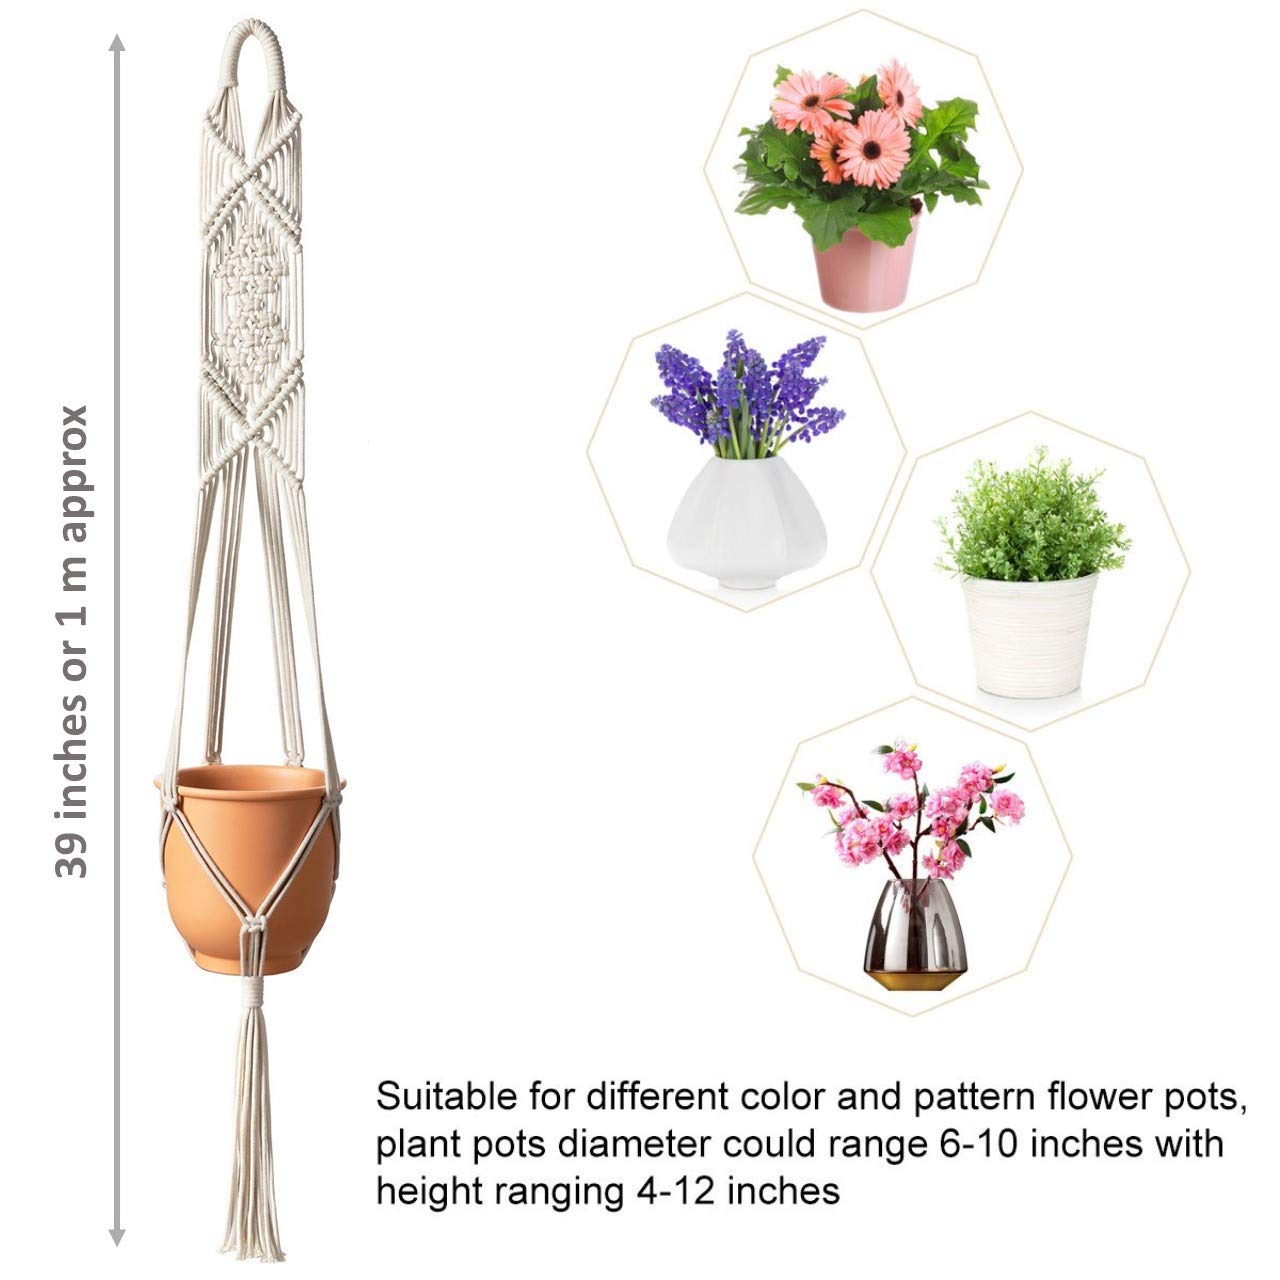 
                  
                    ecofynd Pearl White Macrame Cotton Plant Hanger (Pack of 2)
                  
                